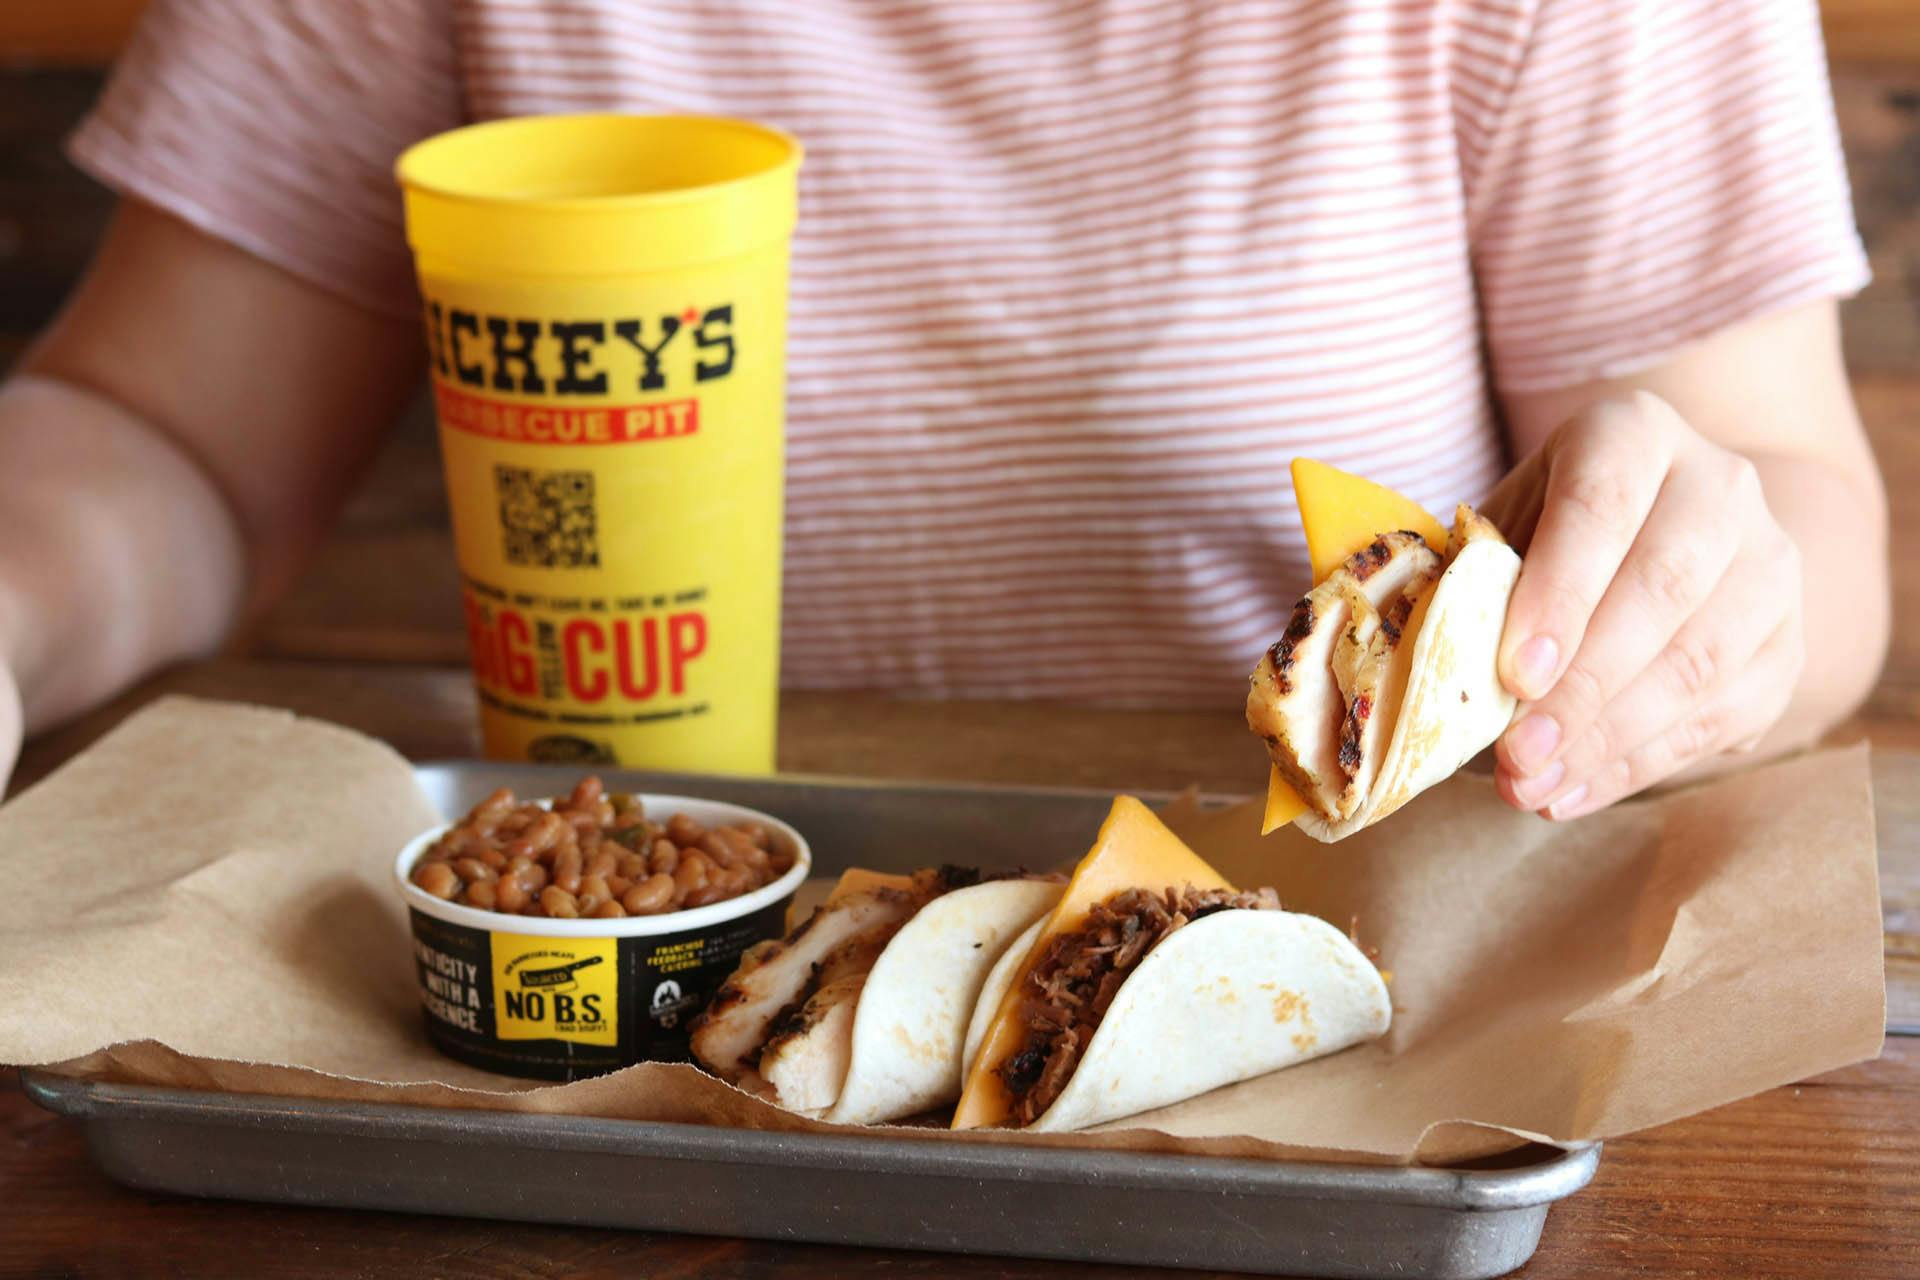 Mr. Dickey Visits Virginia Beach for Grand Opening of New Dickey’s Barbecue Pit